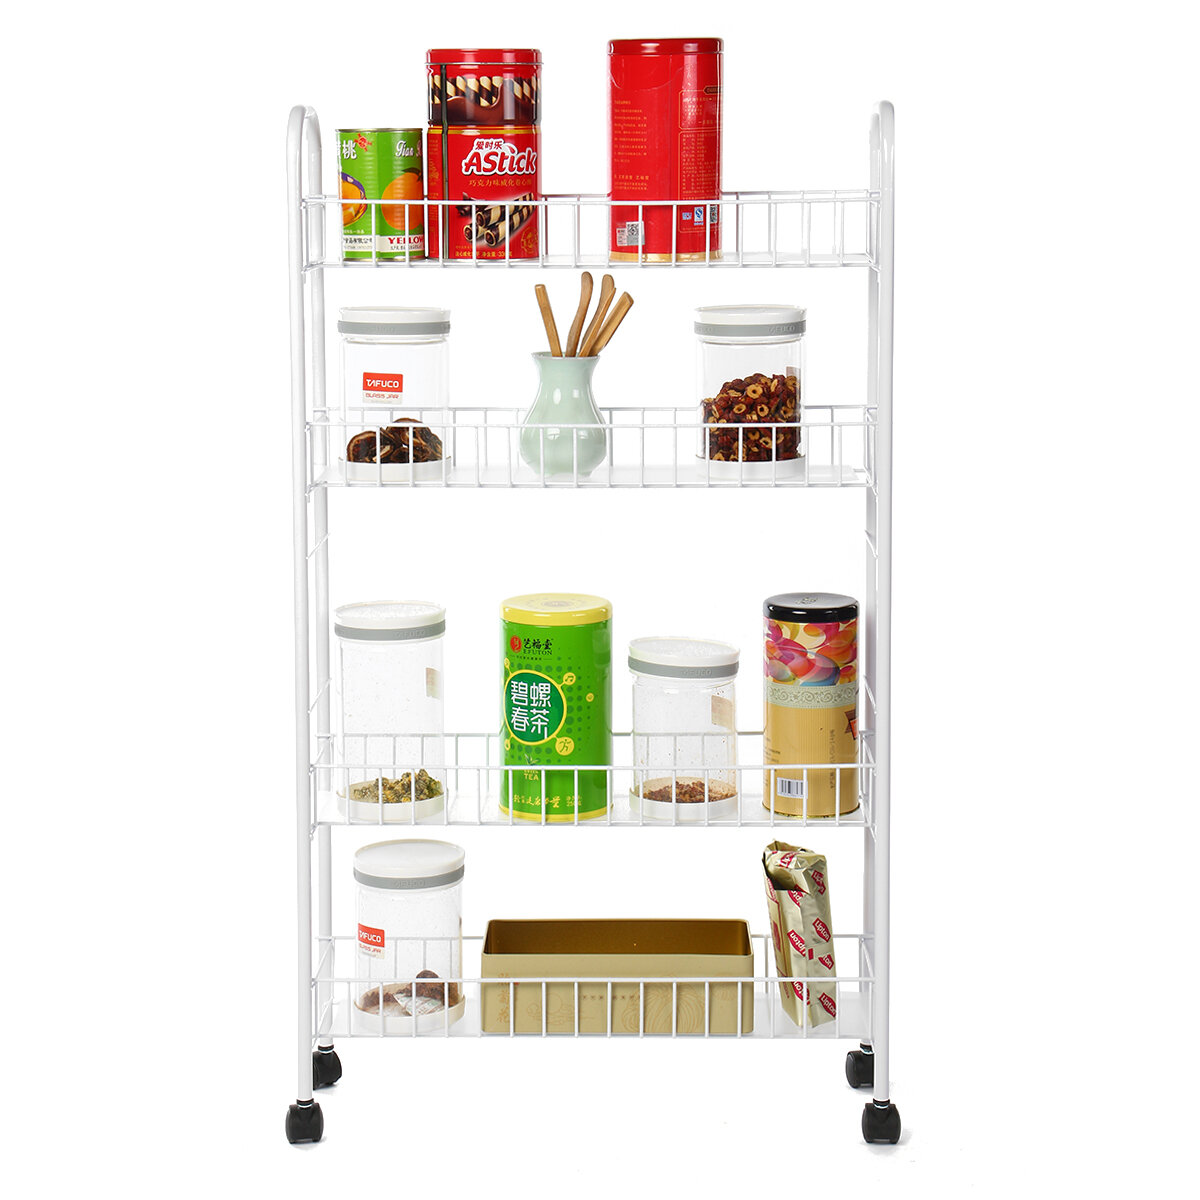 4 Layer Movable Storage Rack with Wheels Refrigerator Gap Cart Saving Space for Multipie Applications